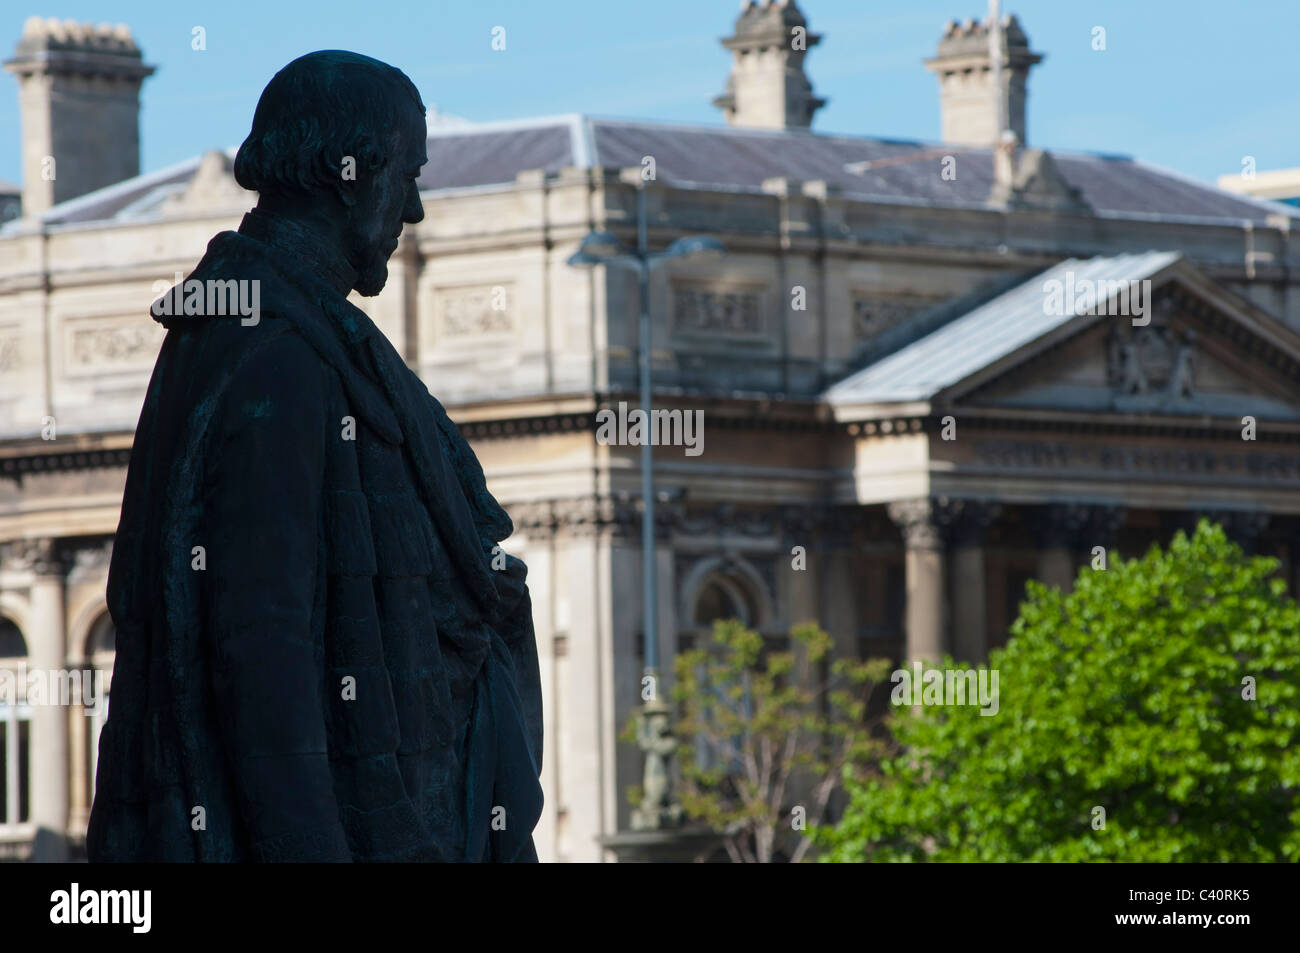 A statue of Disraeli, Earl of Beaconsfield at George's hall, looks towards the Walker Art Gallery, Liverpool, England. Stock Photo